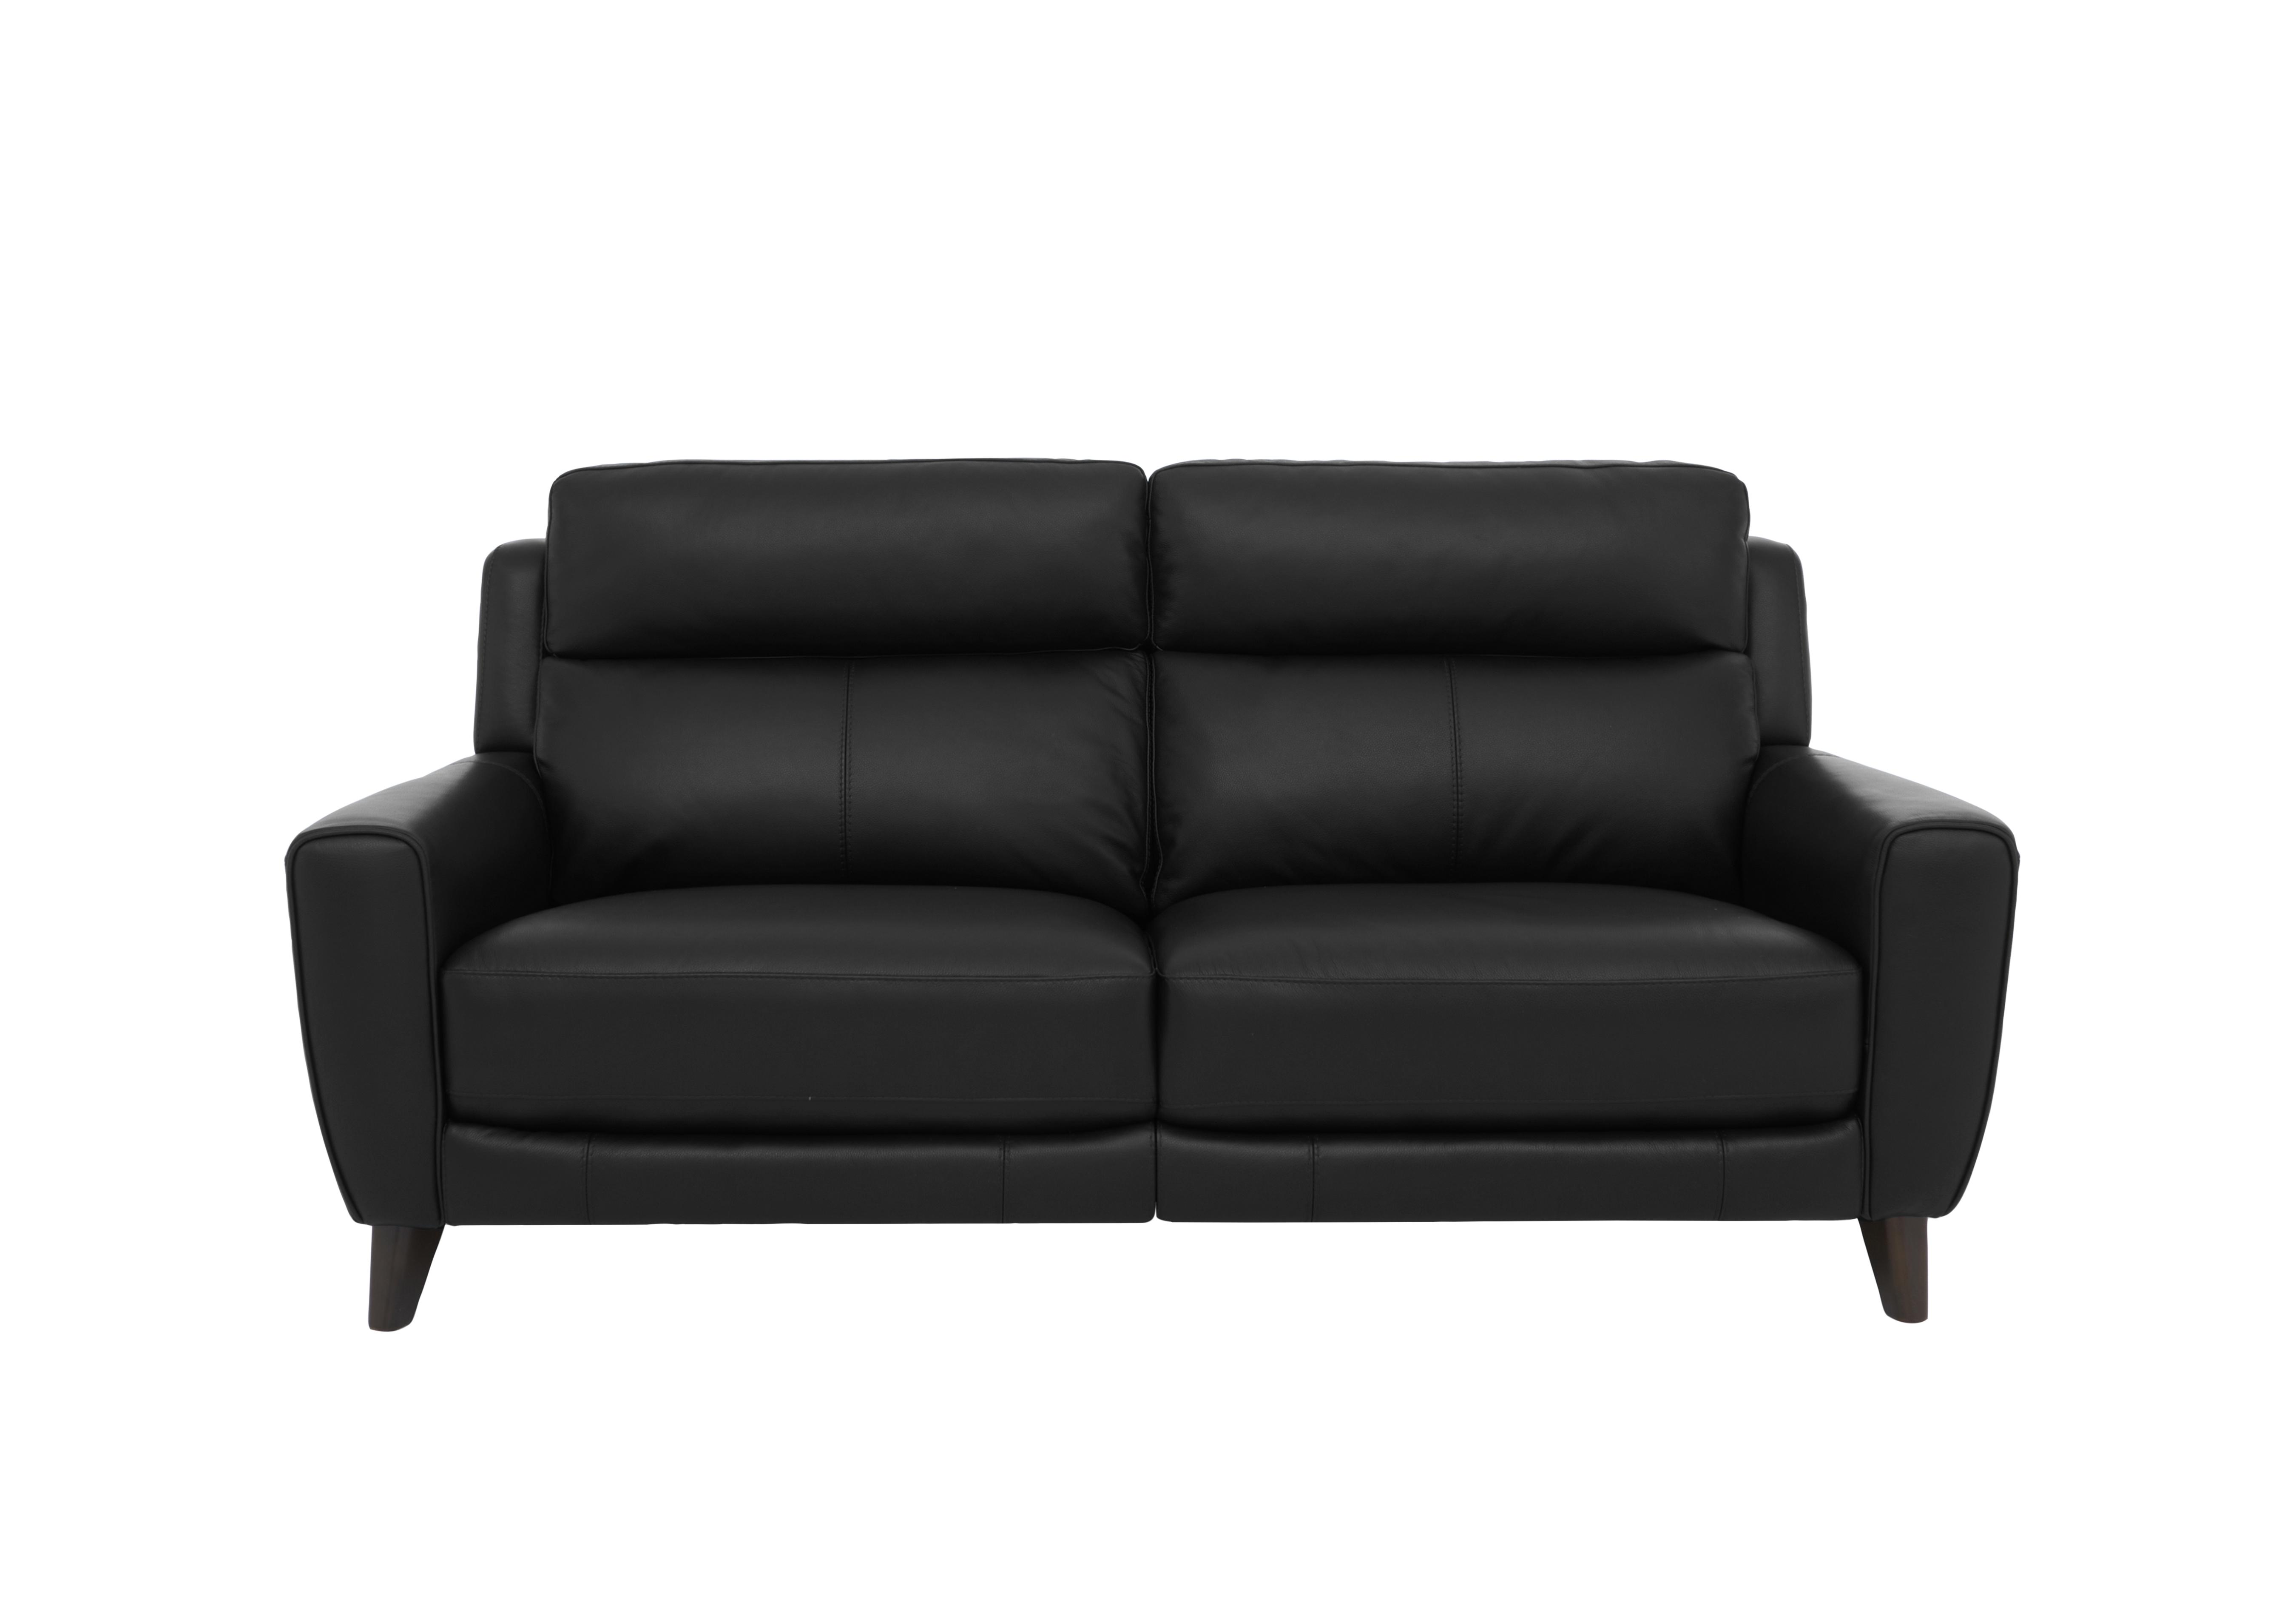 Zen 3 Seater Leather Power Recliner Sofa with Power Headrests in Bx-023c Black on Furniture Village